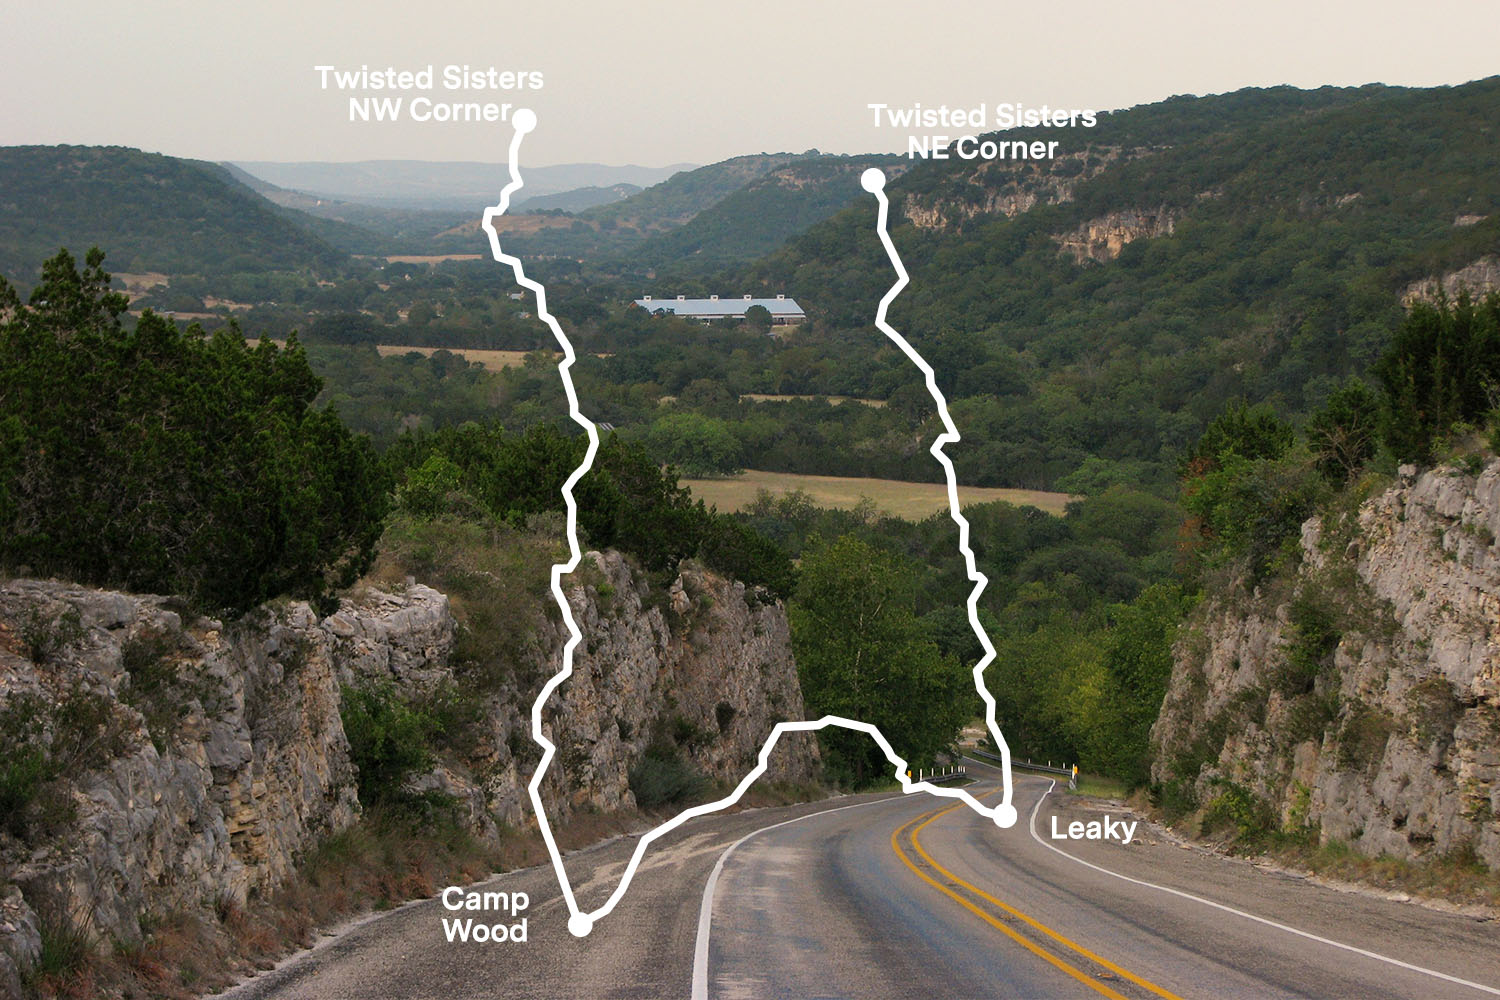 The Best Scenic Drive in Texas are the Three Twisted Sisters, or Hill Country Ranch Roads 335, 336 and 337